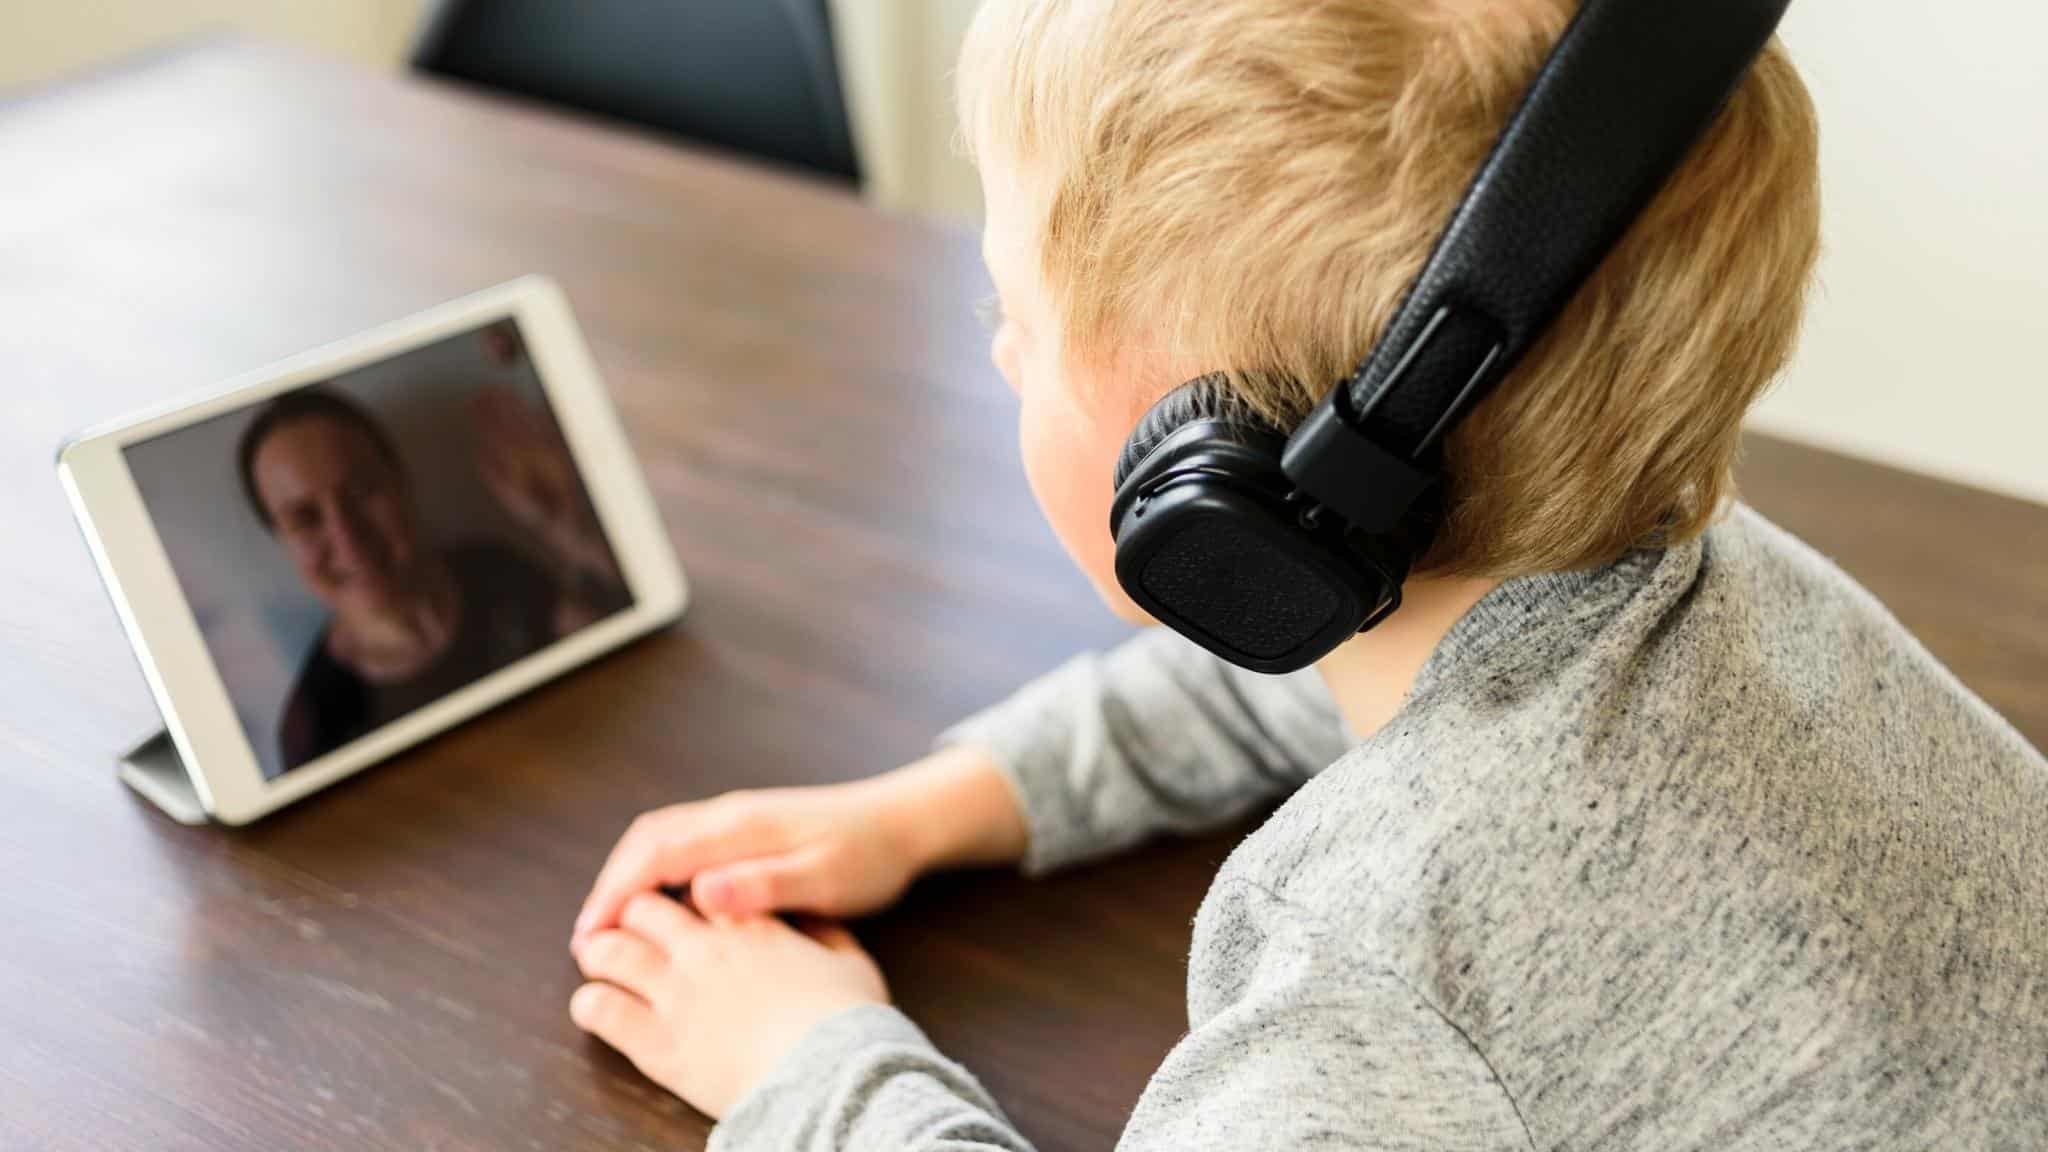 5 Best Kids Tablets With Youtube & Netflix For Video Streaming